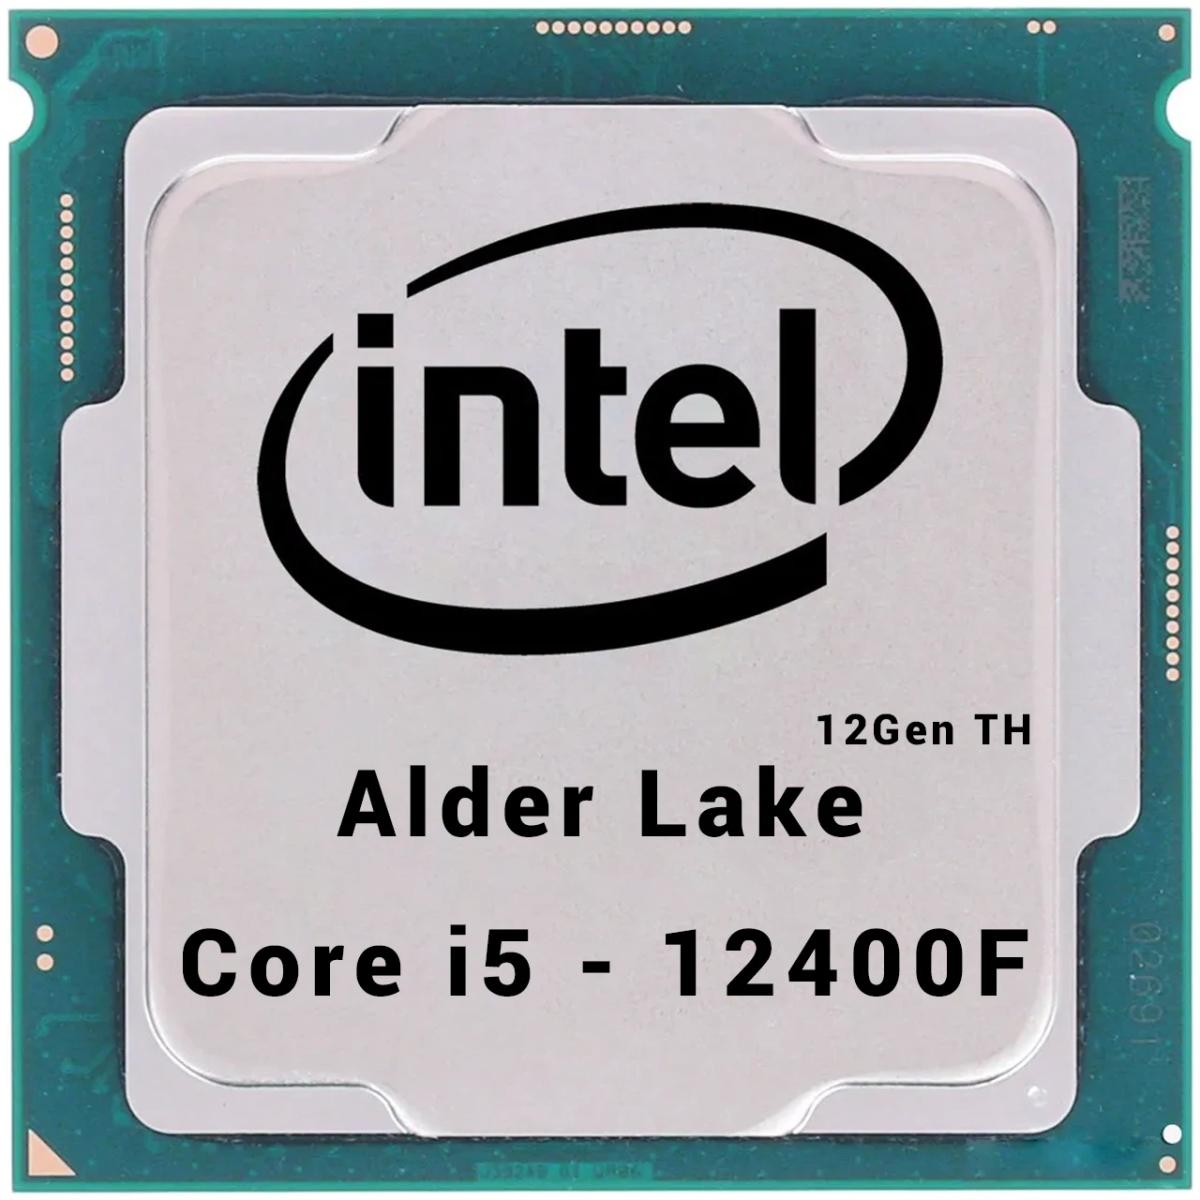 Intel NEW 12Gen Core i5-12400F Alder Lake 6-Cores up to 4.4 GHz 25.5MB , Tray